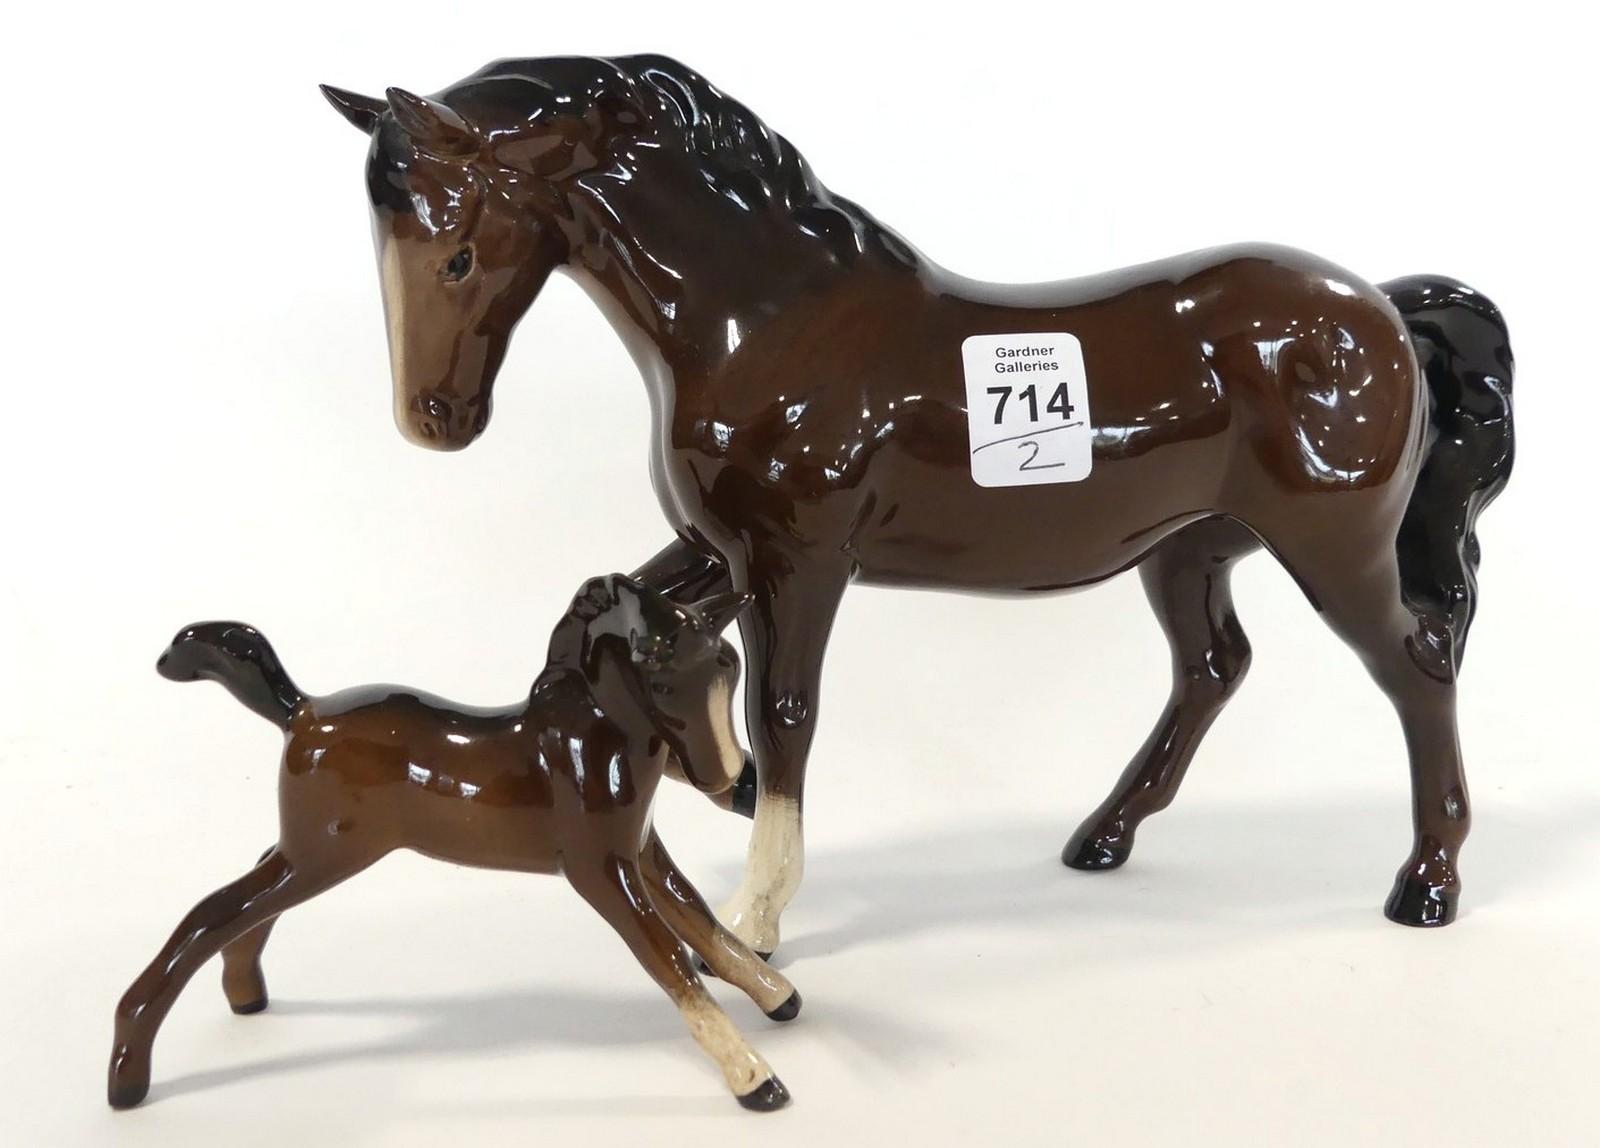 ROYAL DOULTON AND BESWICK "HORSE" FIGURINES